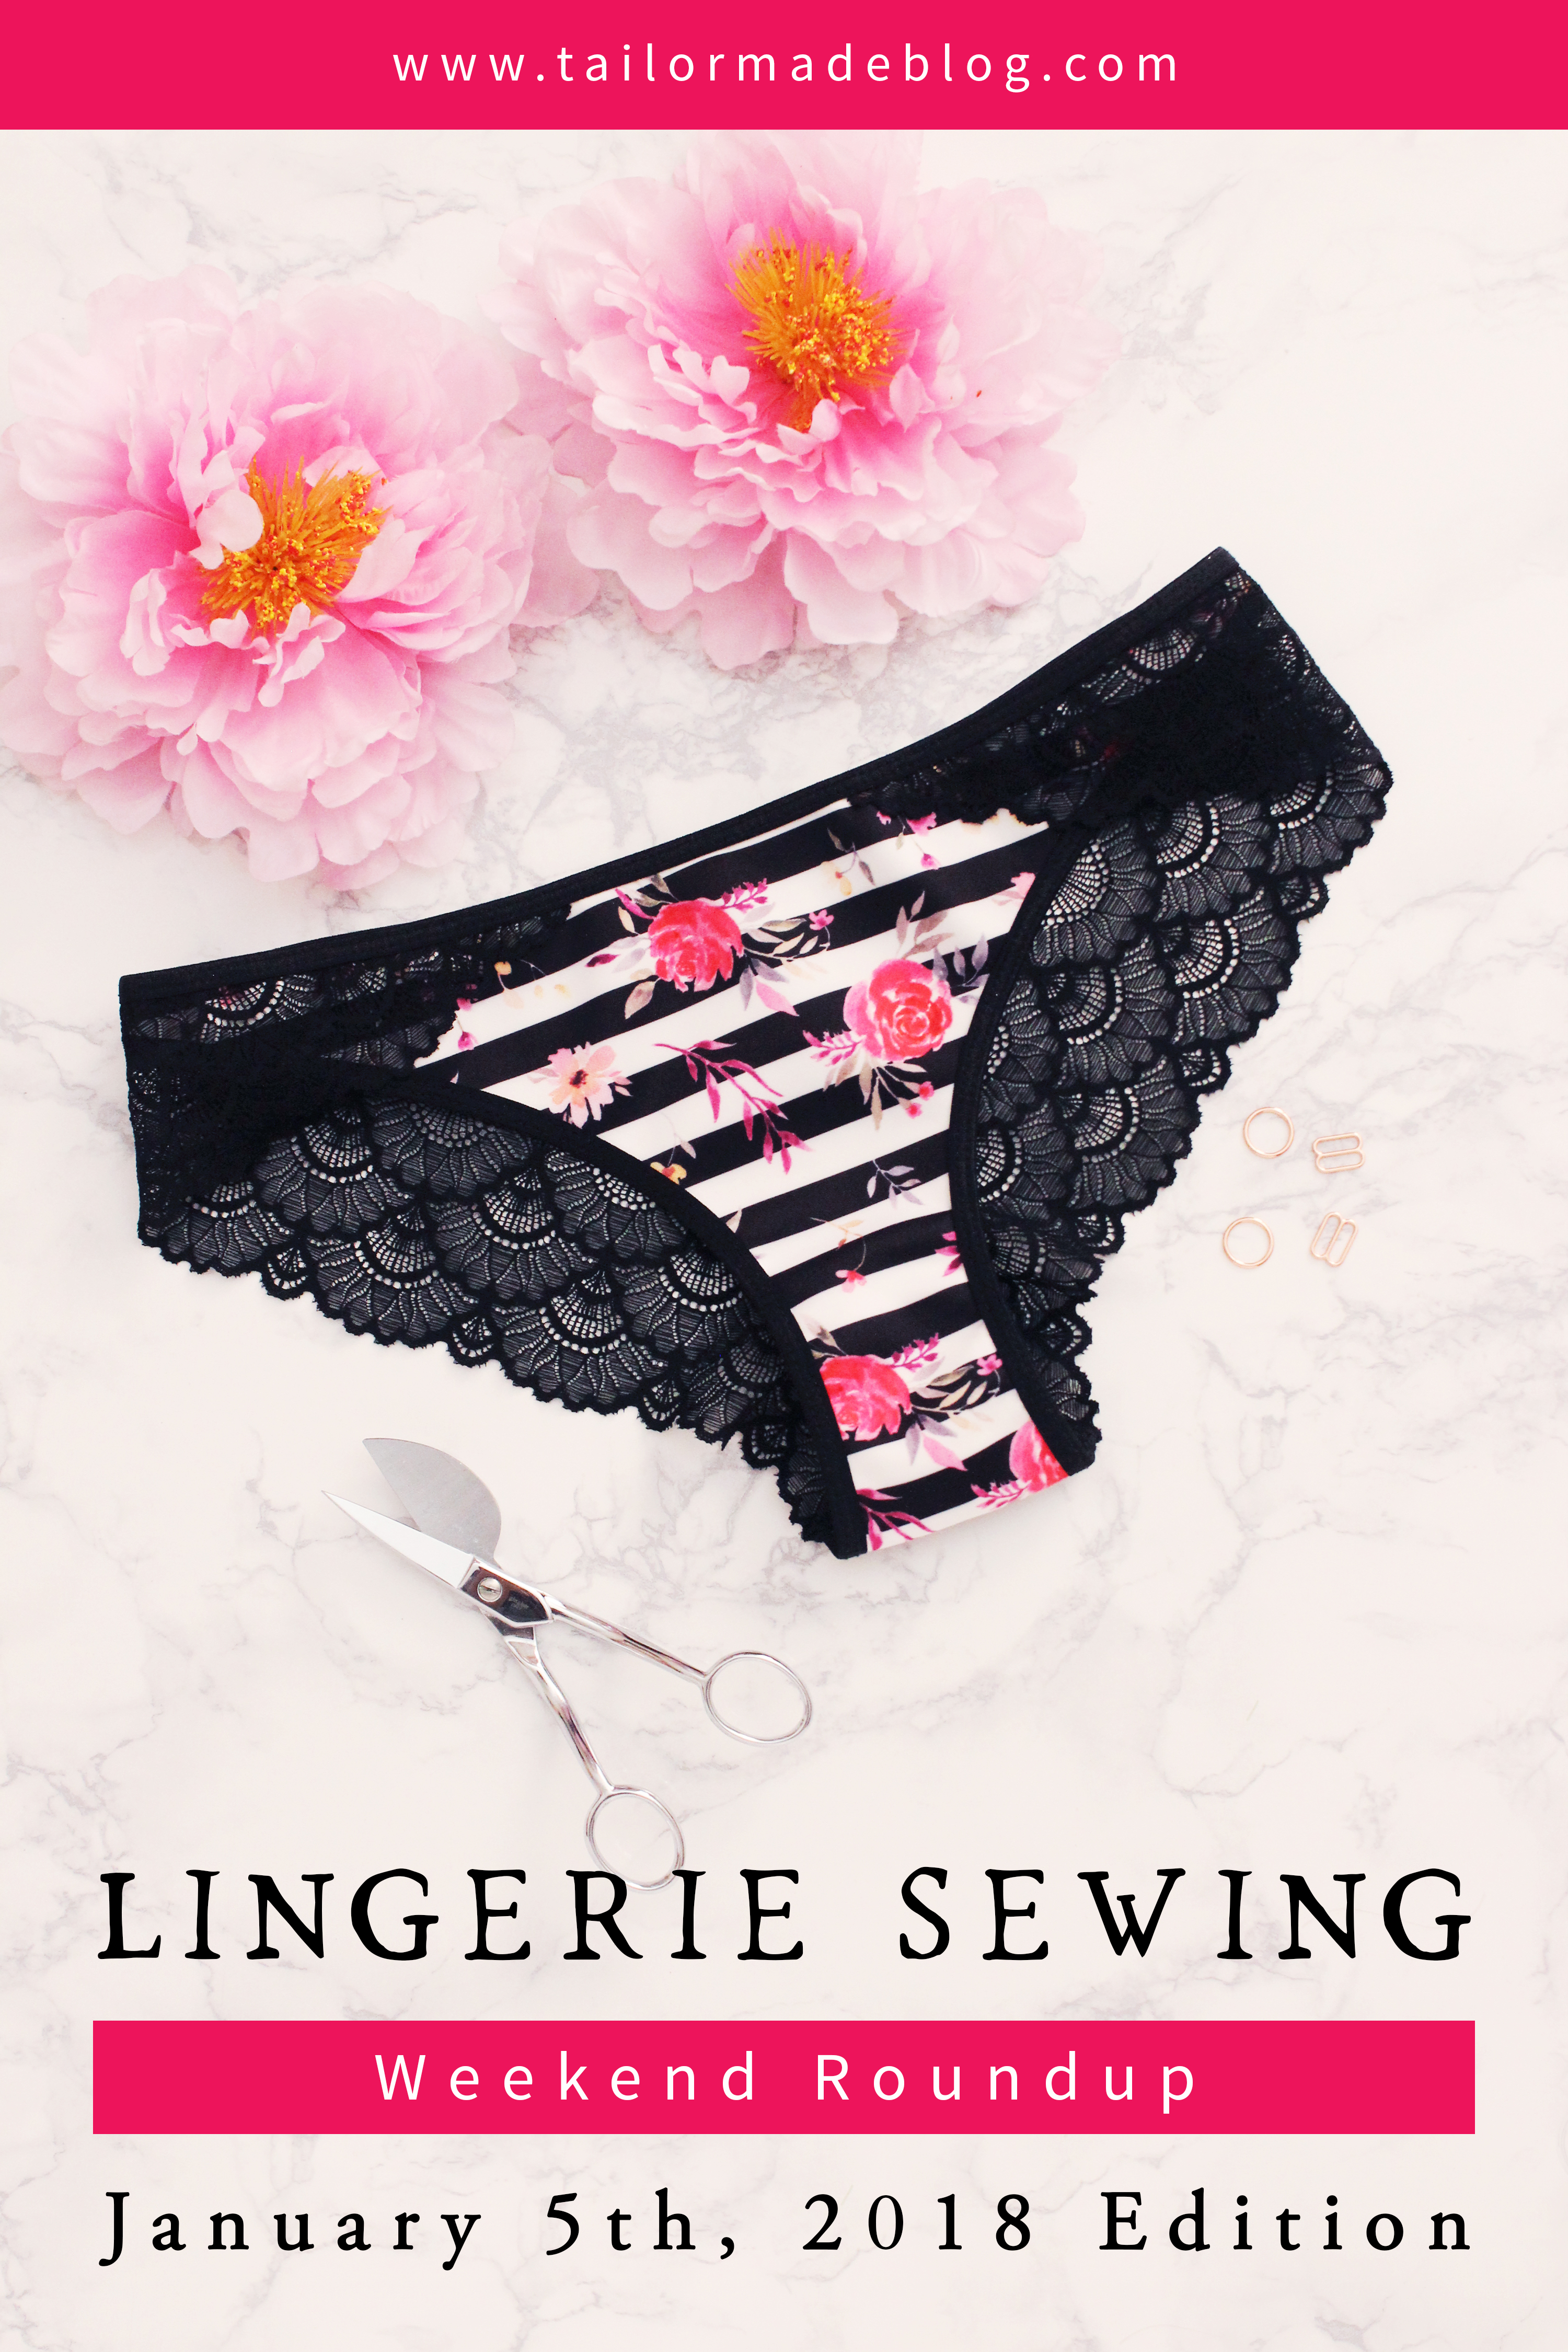 January 5th, 2018 Lingerie Sewing Weekend Round Up Latest news and makes and sewing projects from the lingerie sewing bra making community